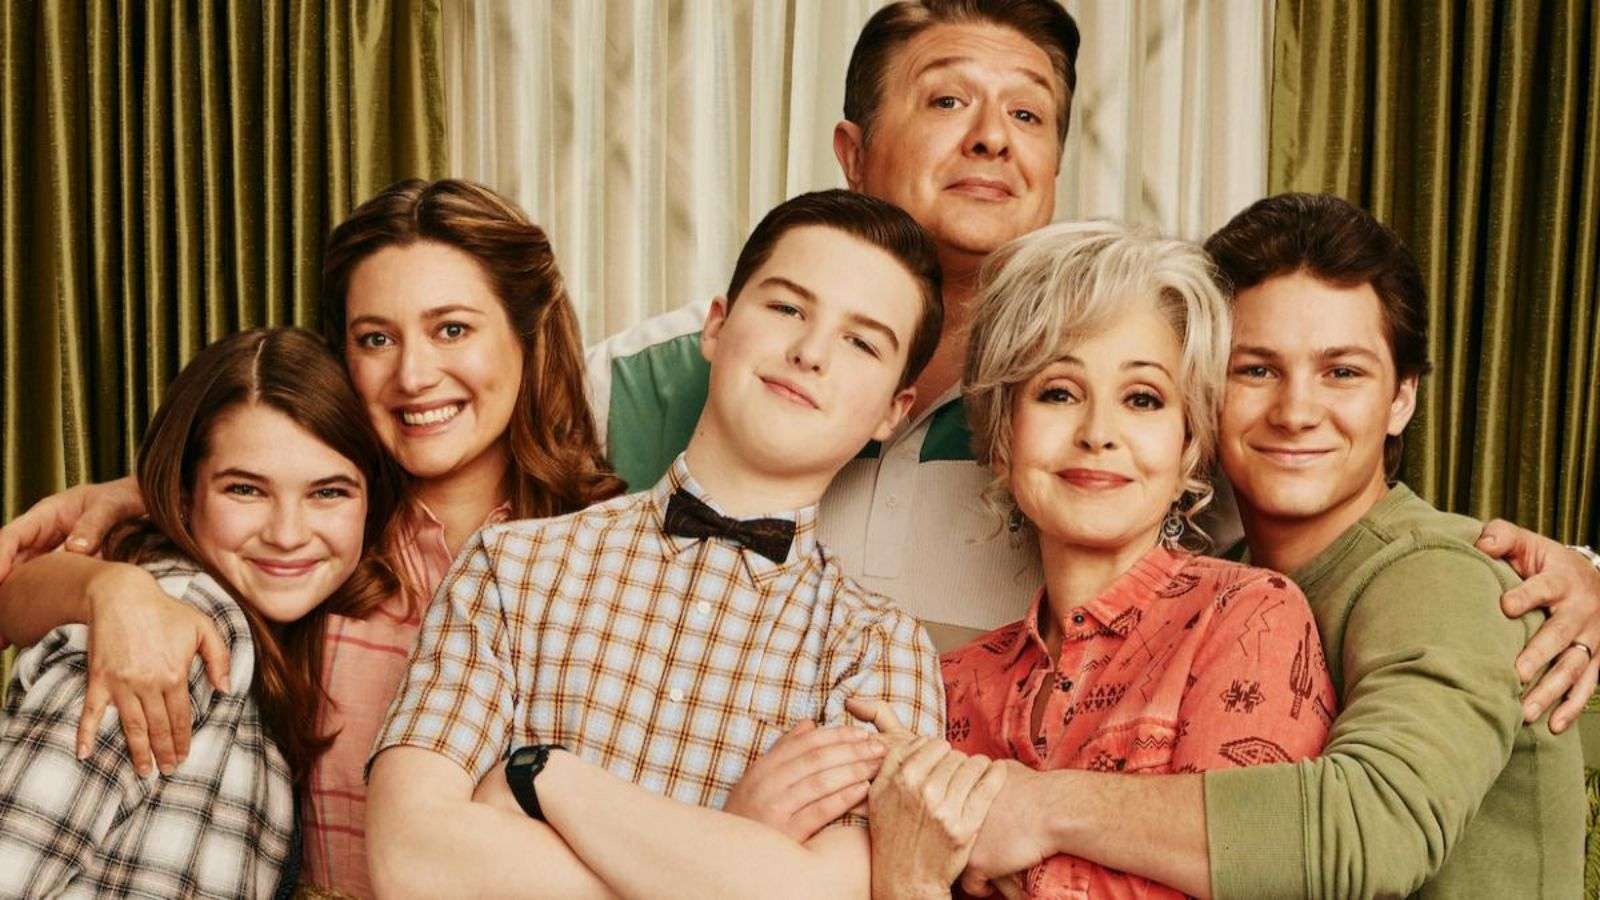 The Cooper family in Young Sheldon